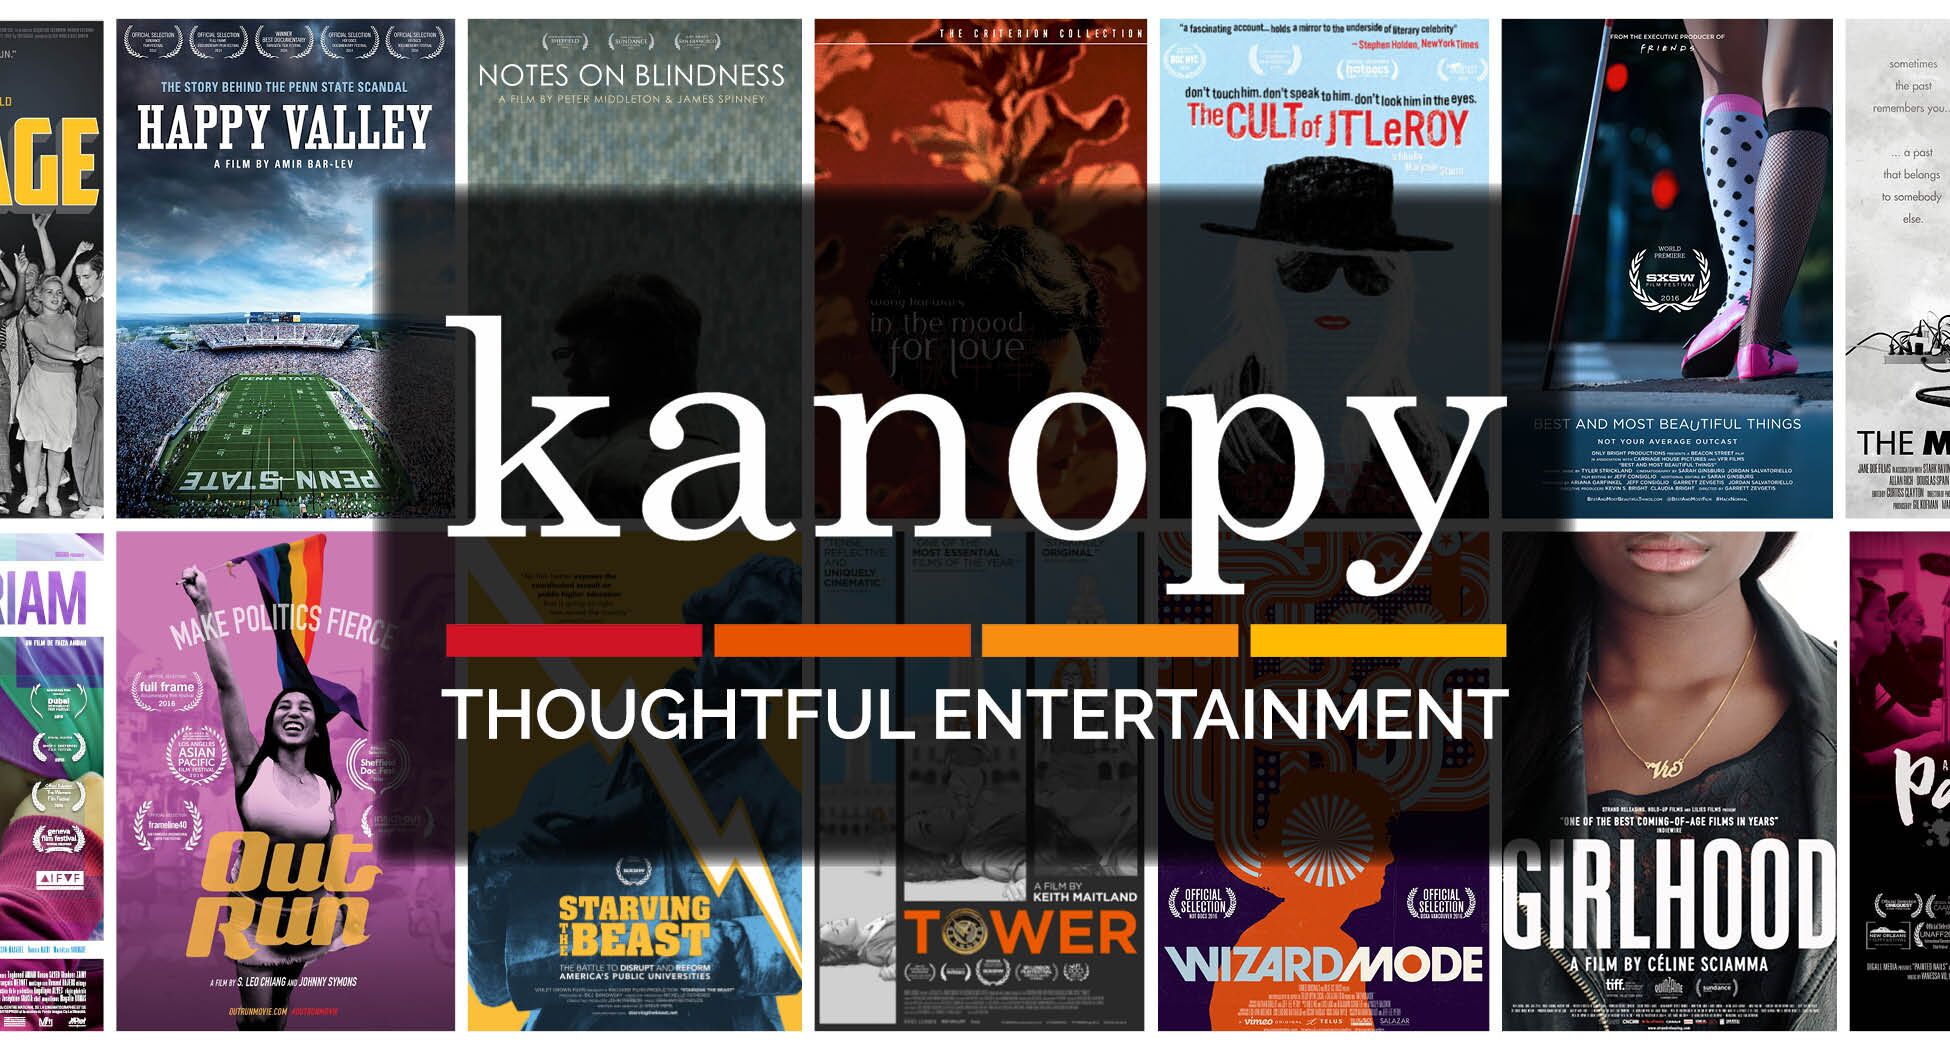 Changes to Kanopy Streaming Service - Duke University Libraries Blogs